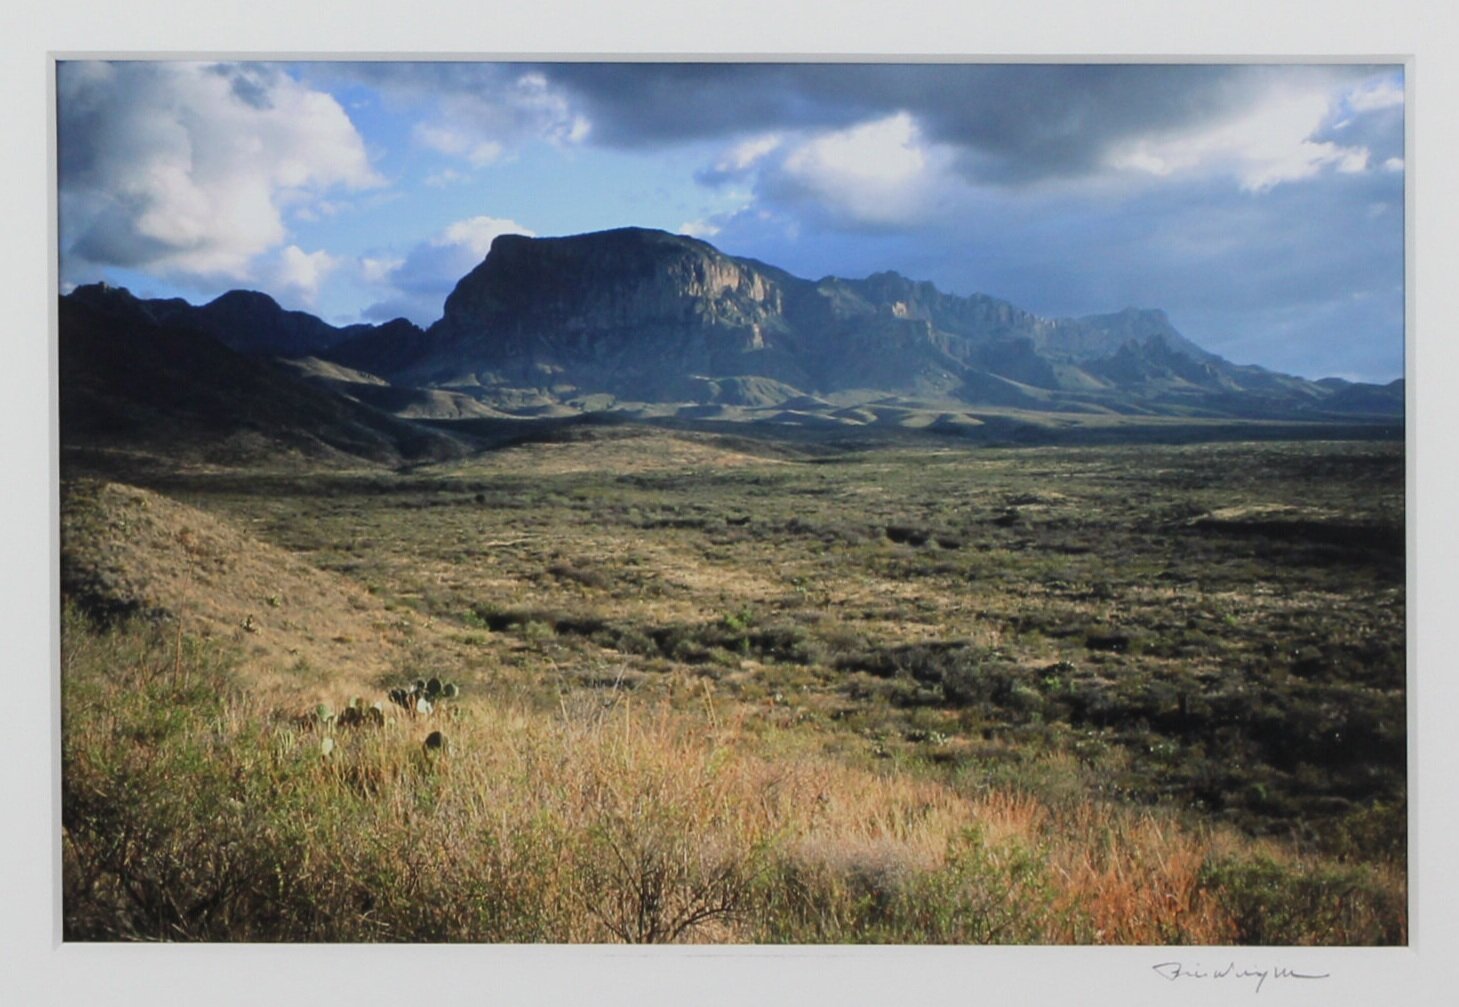 Bill Wright, The Chisos Mountains, 2002